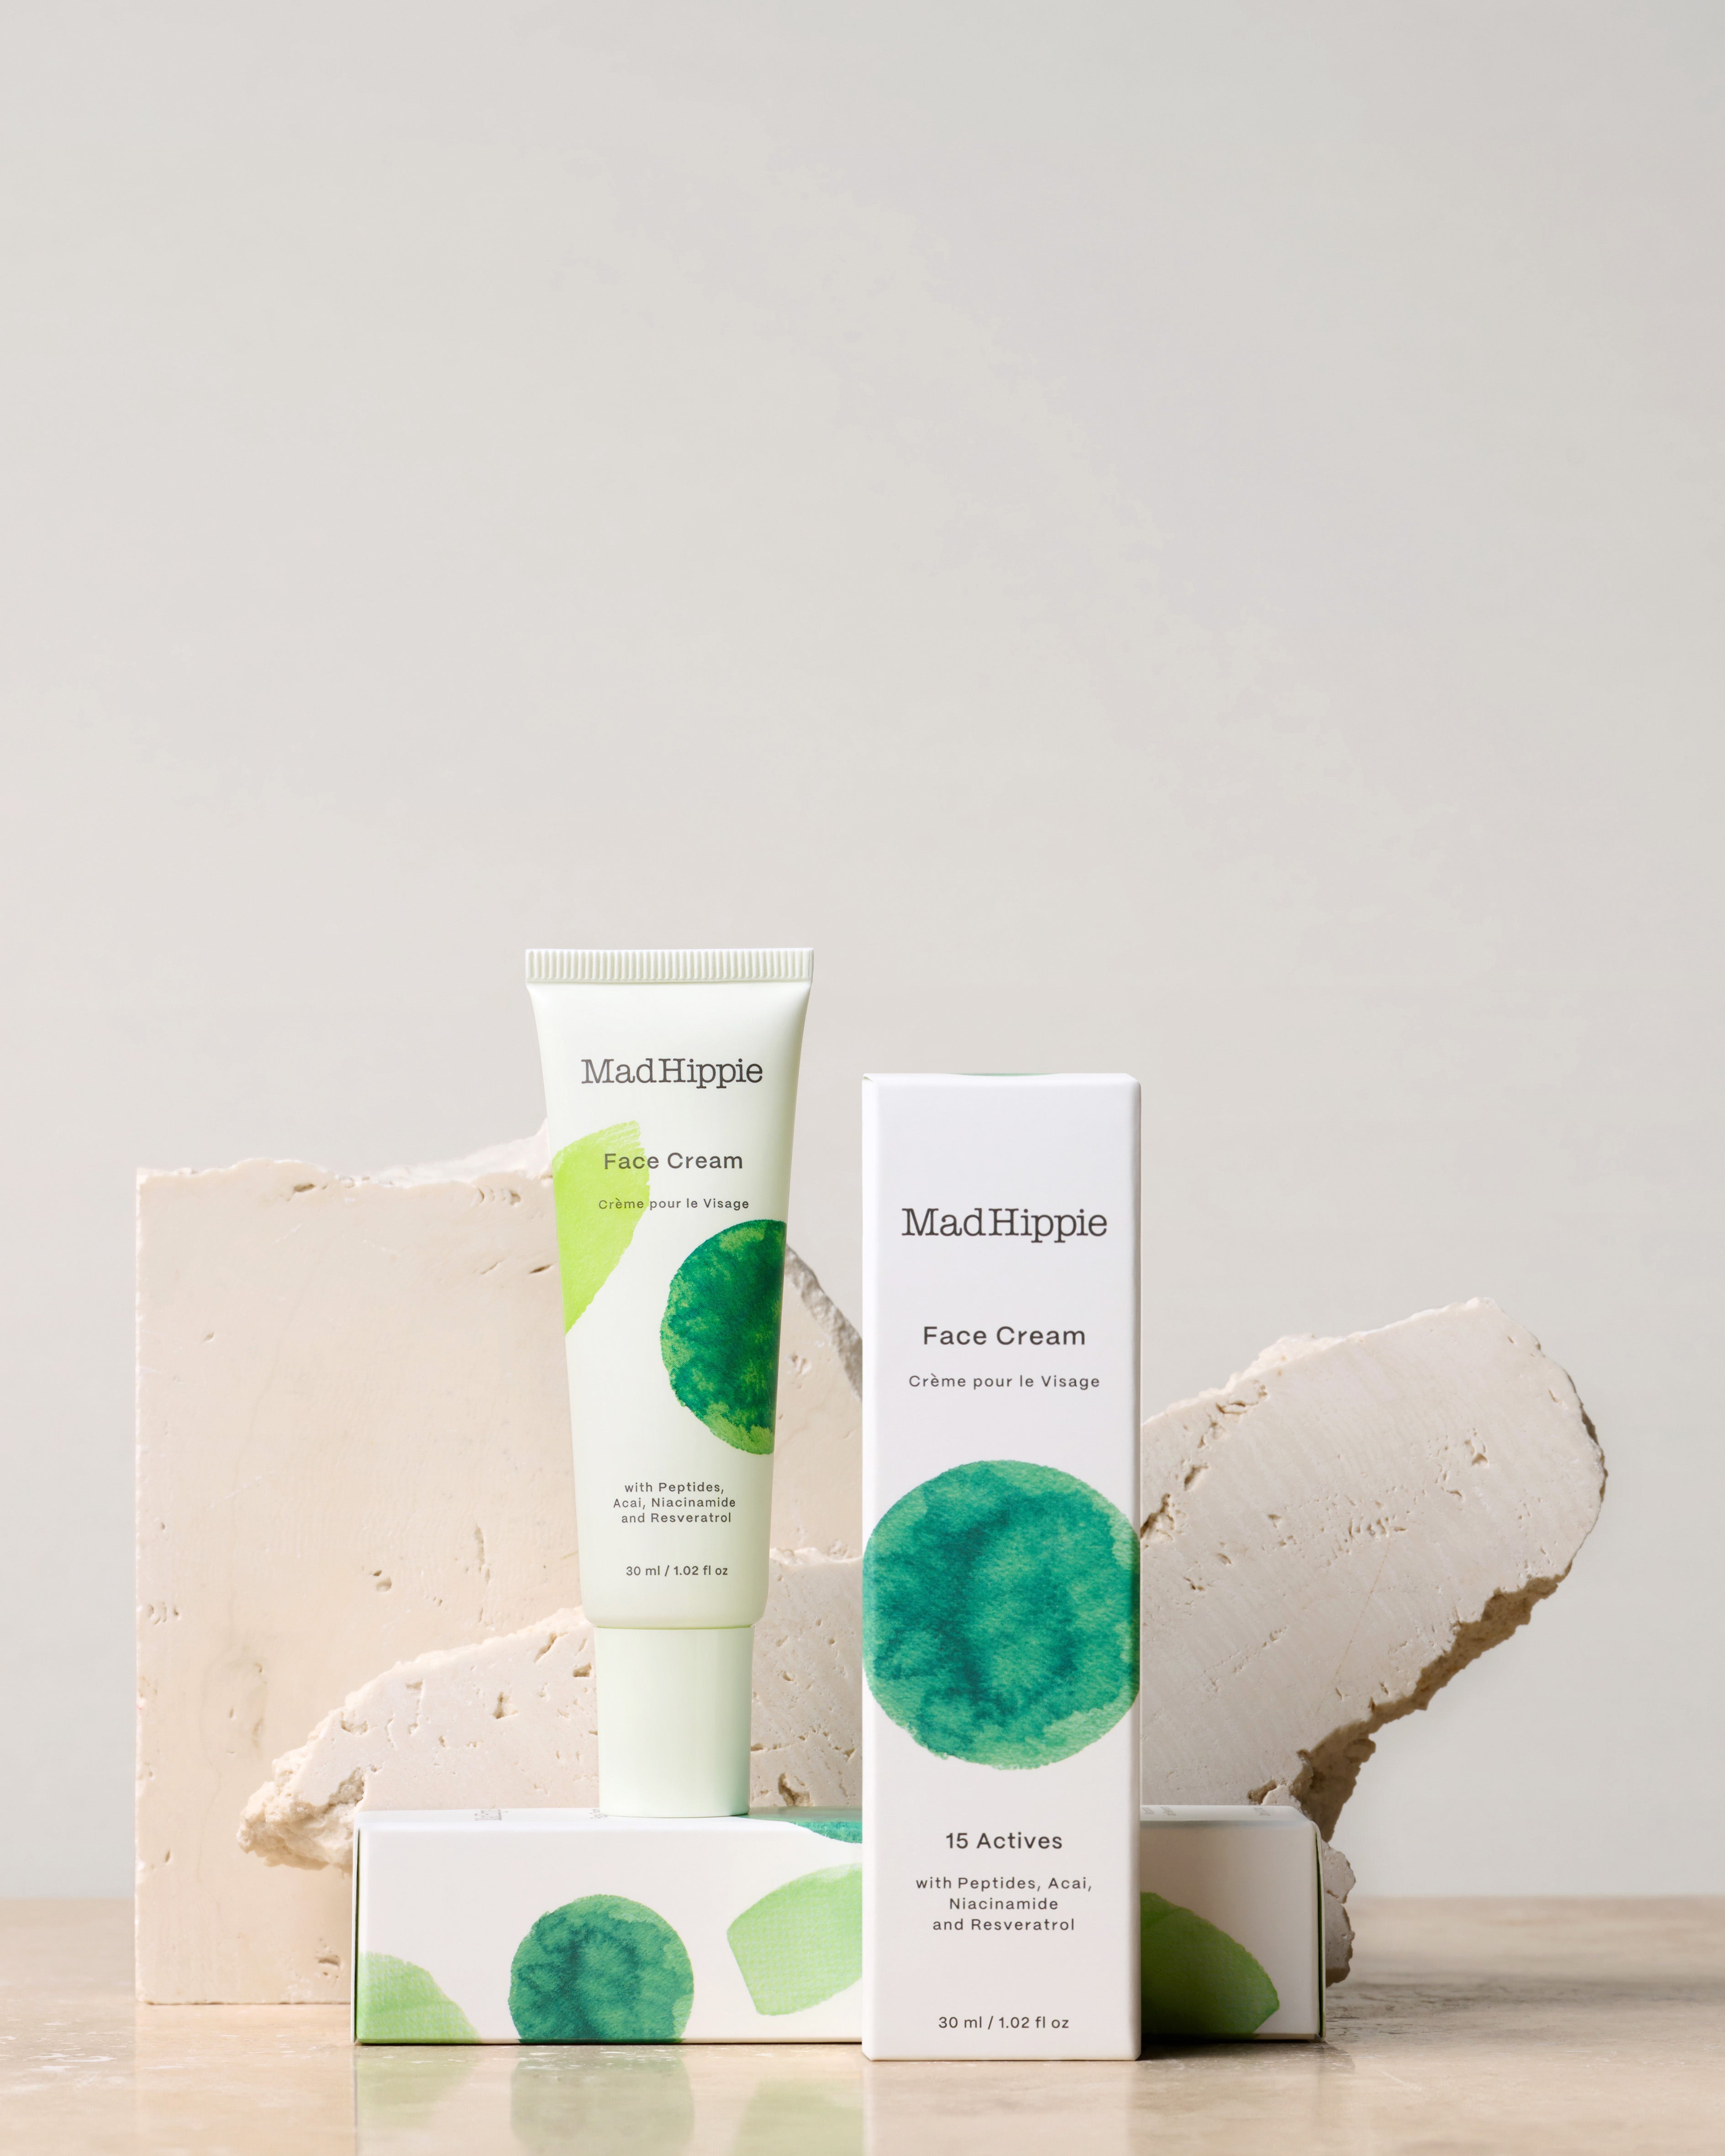 Face Cream tube + two boxes in front of stone slabs, with gray background